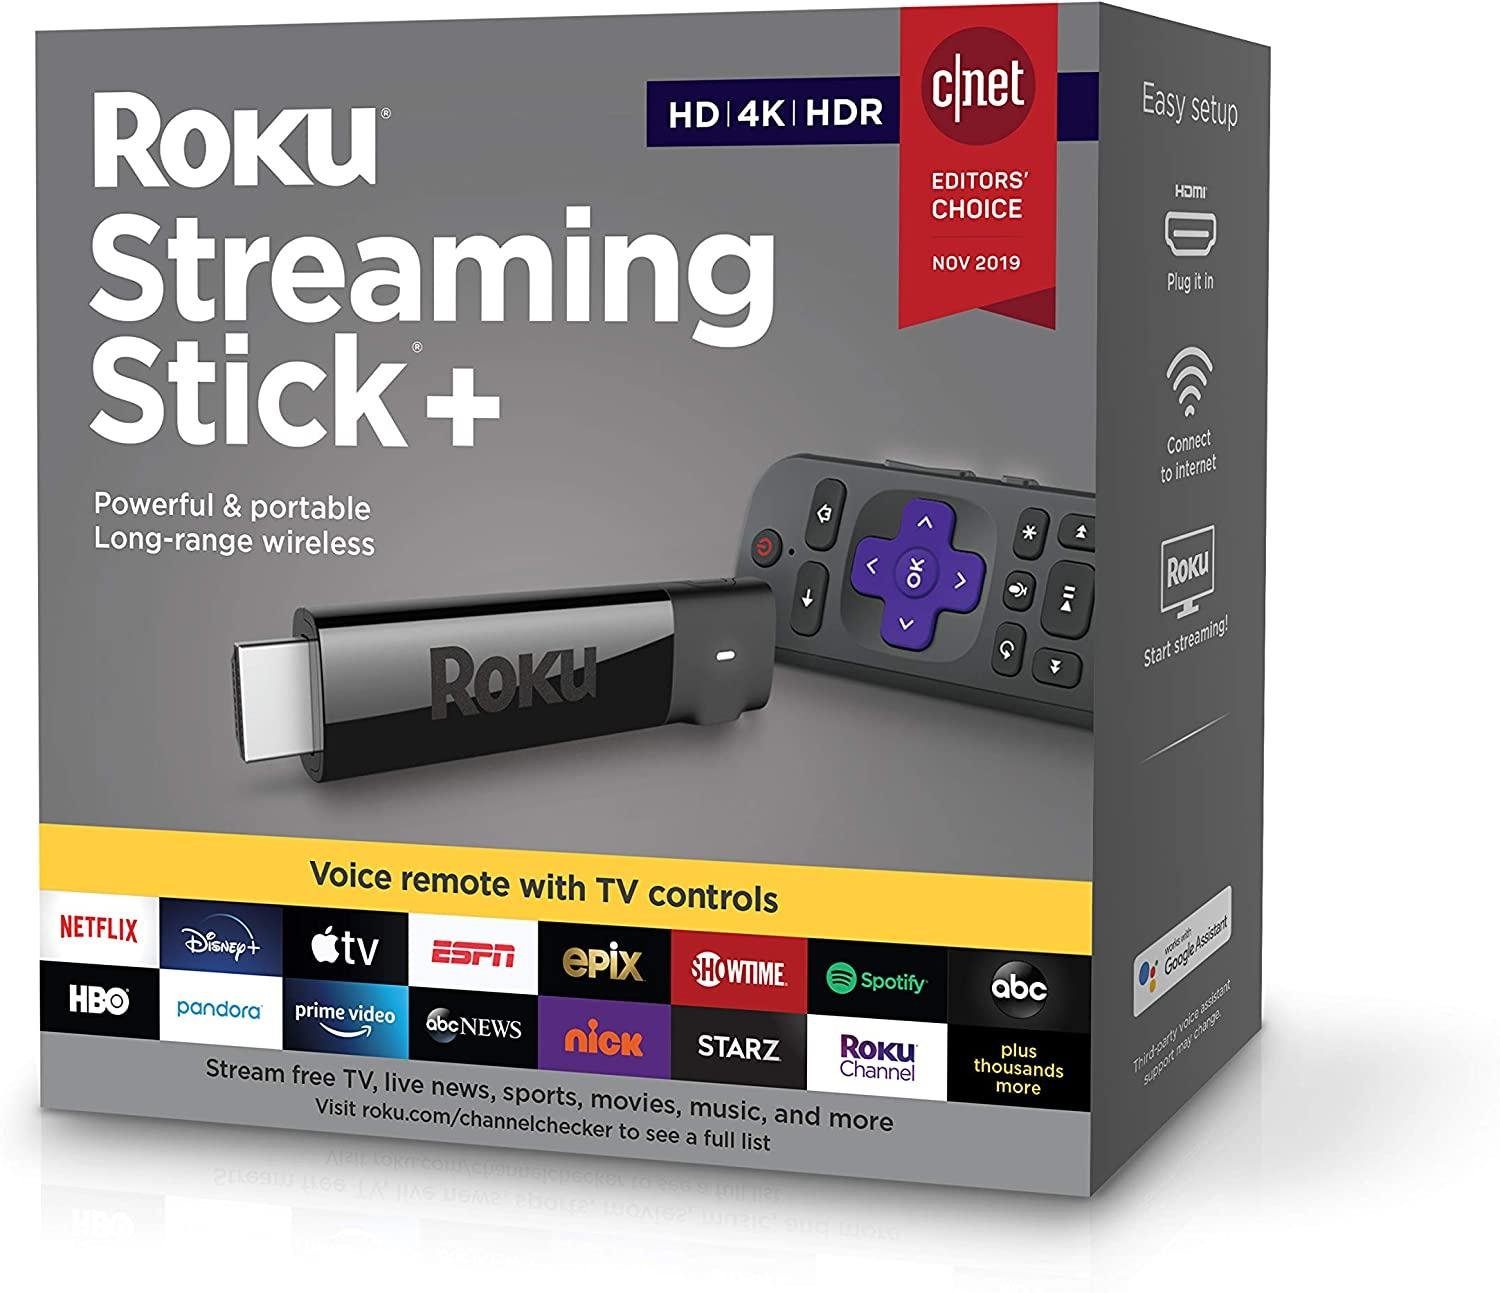 Roku Streaming Stick+ | HD/4K/HDR Streaming Device with Long-range Wireless and 